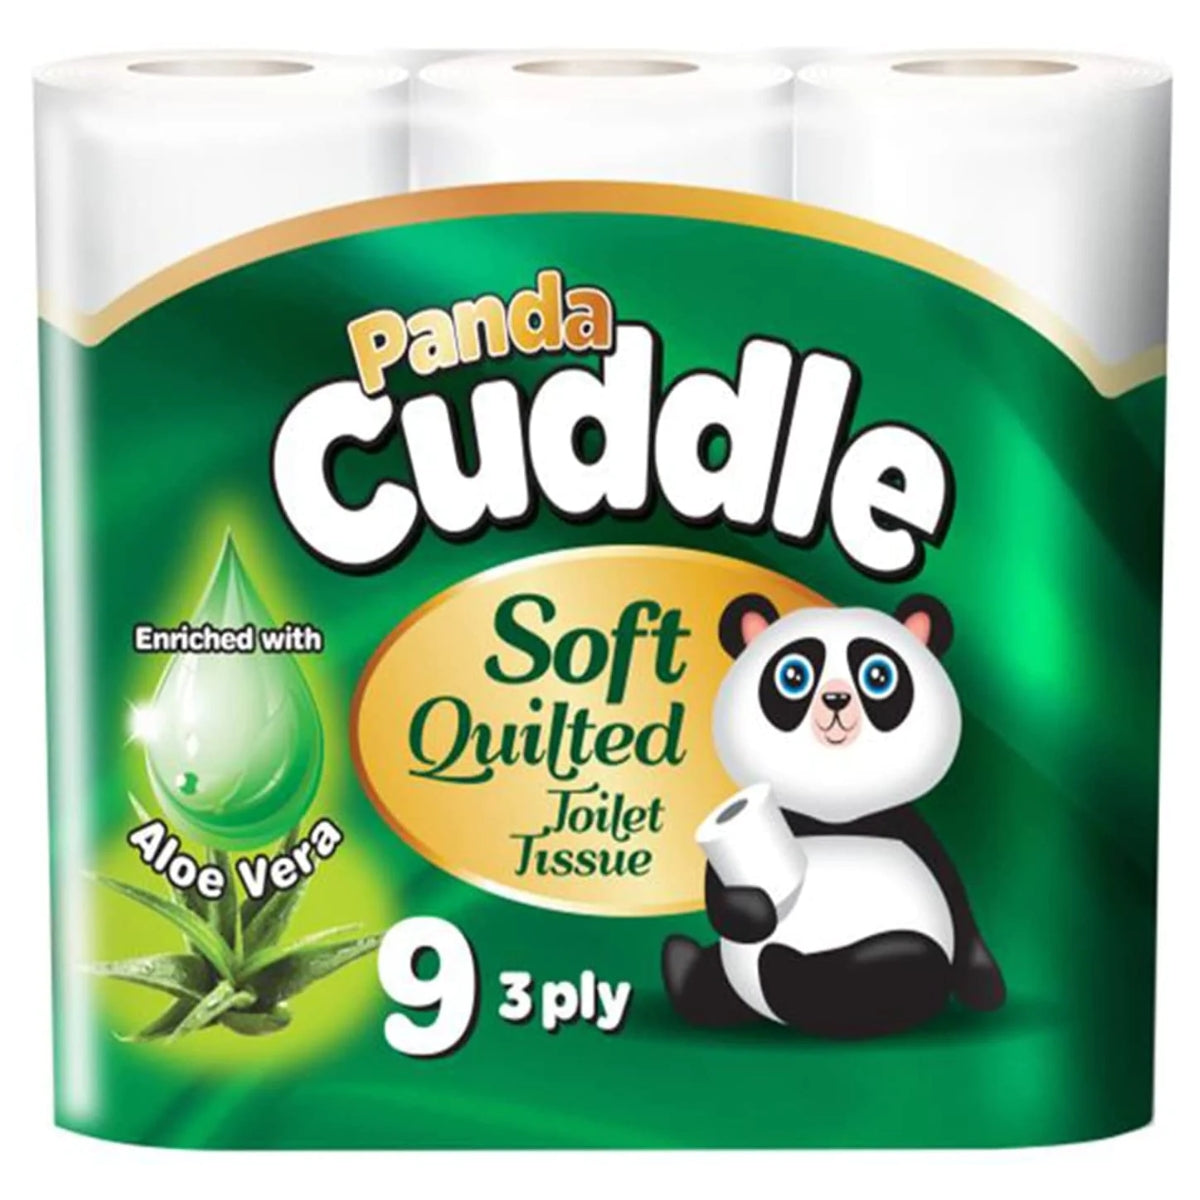 A group of Panda - Cuddle Aloe Vera Soft Quilted Toilet Rolls - 9 Pack.